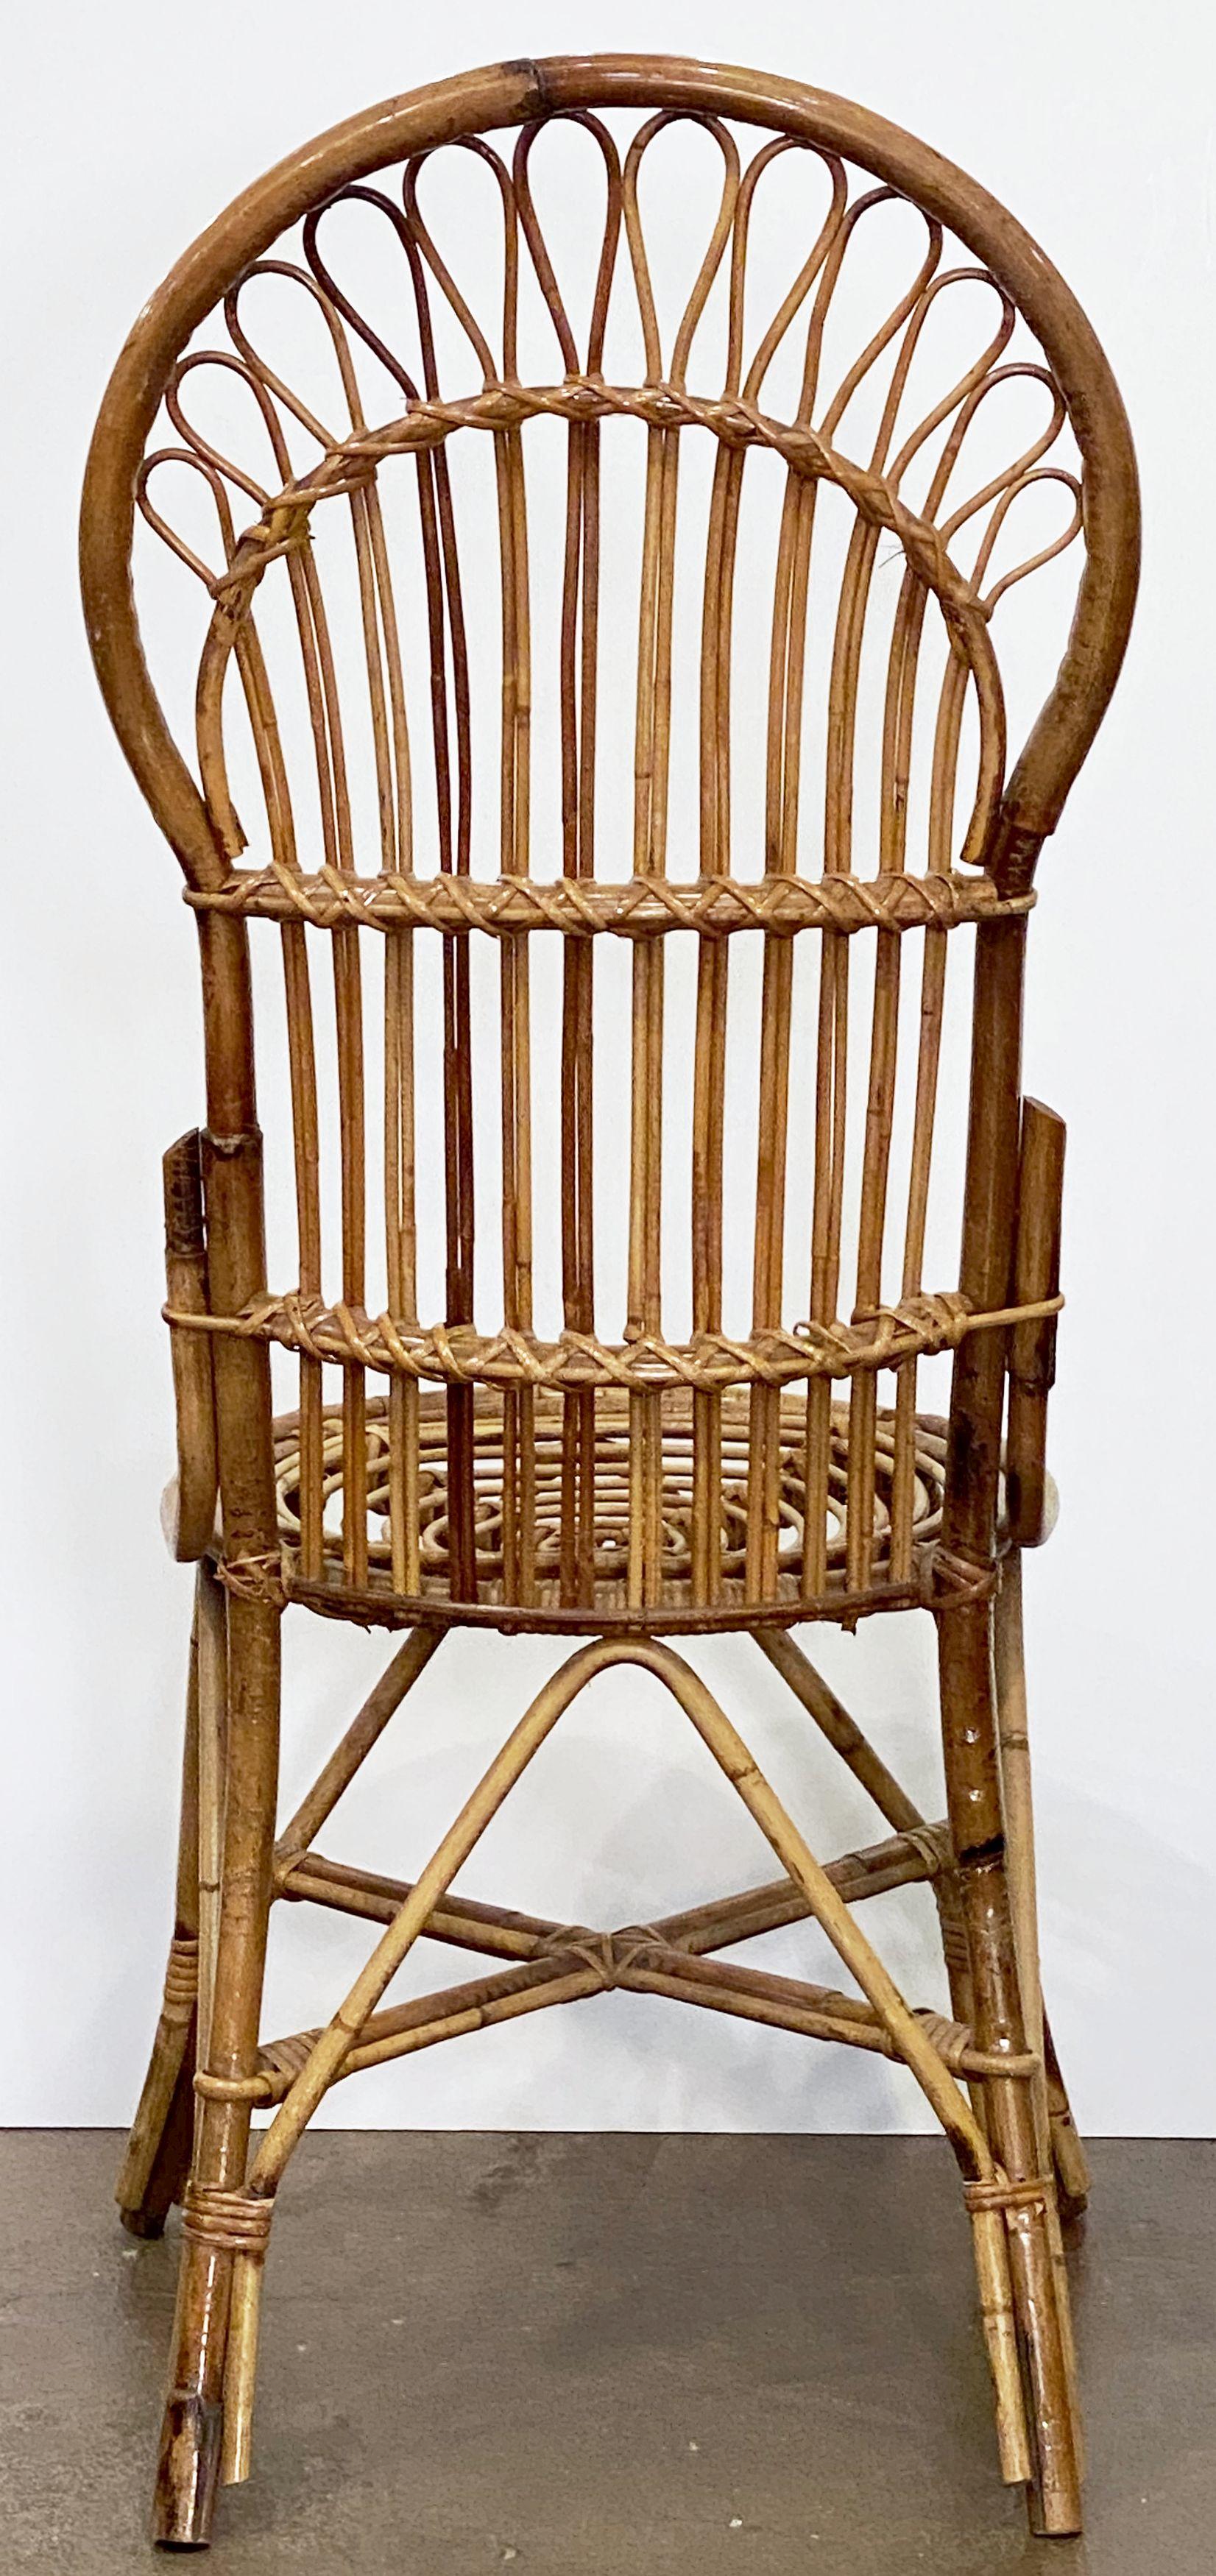 Italian Fan-Backed Chair of Rattan and Bamboo from the Mid-20th Century For Sale 16